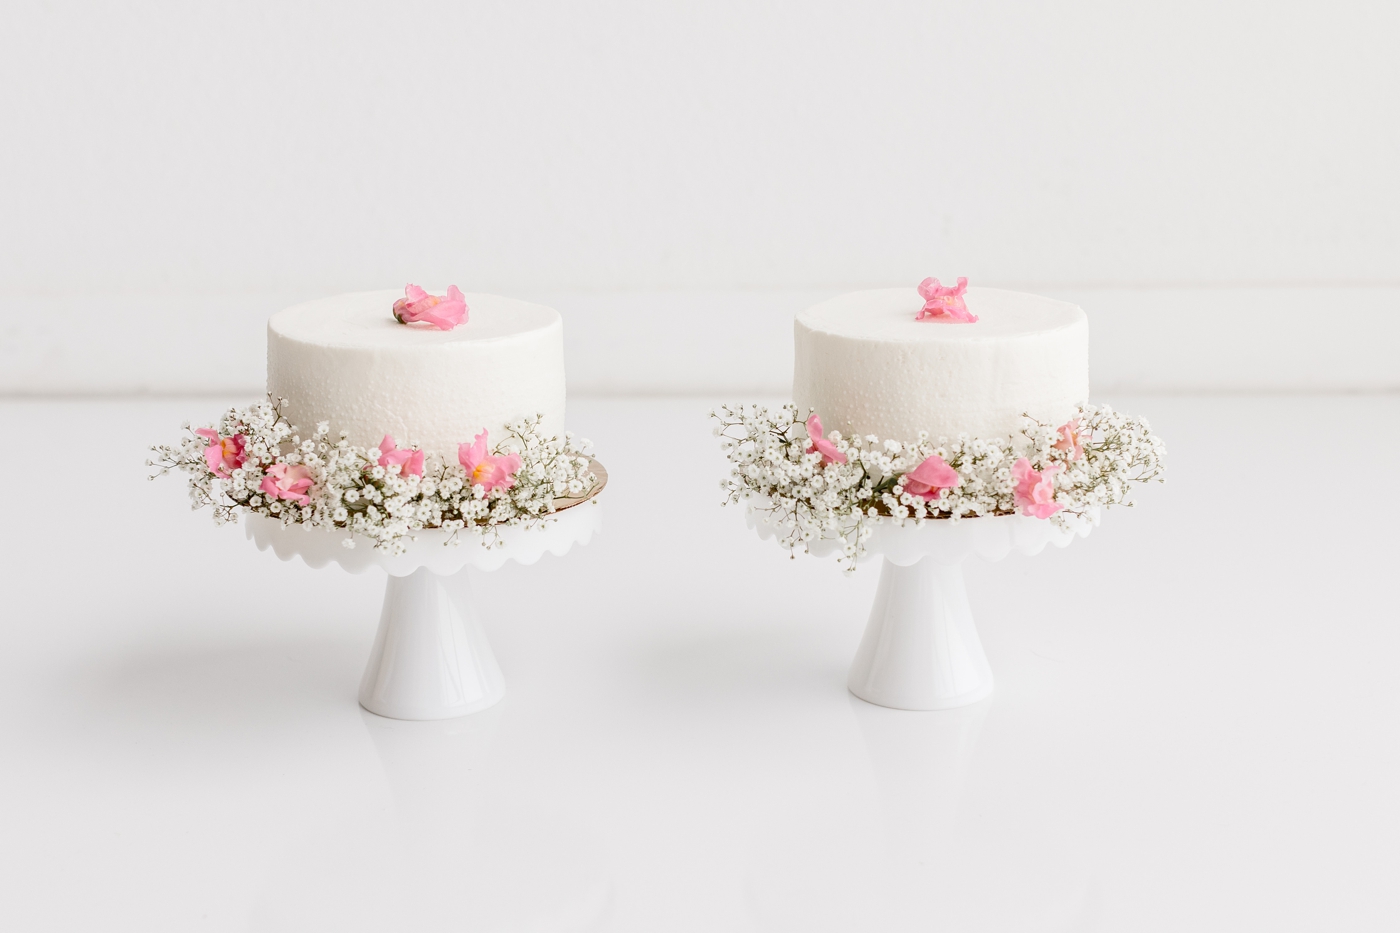 Two smash cakes for twin girls' first birthday photo session. Photo by Sana Ahmed Photography.